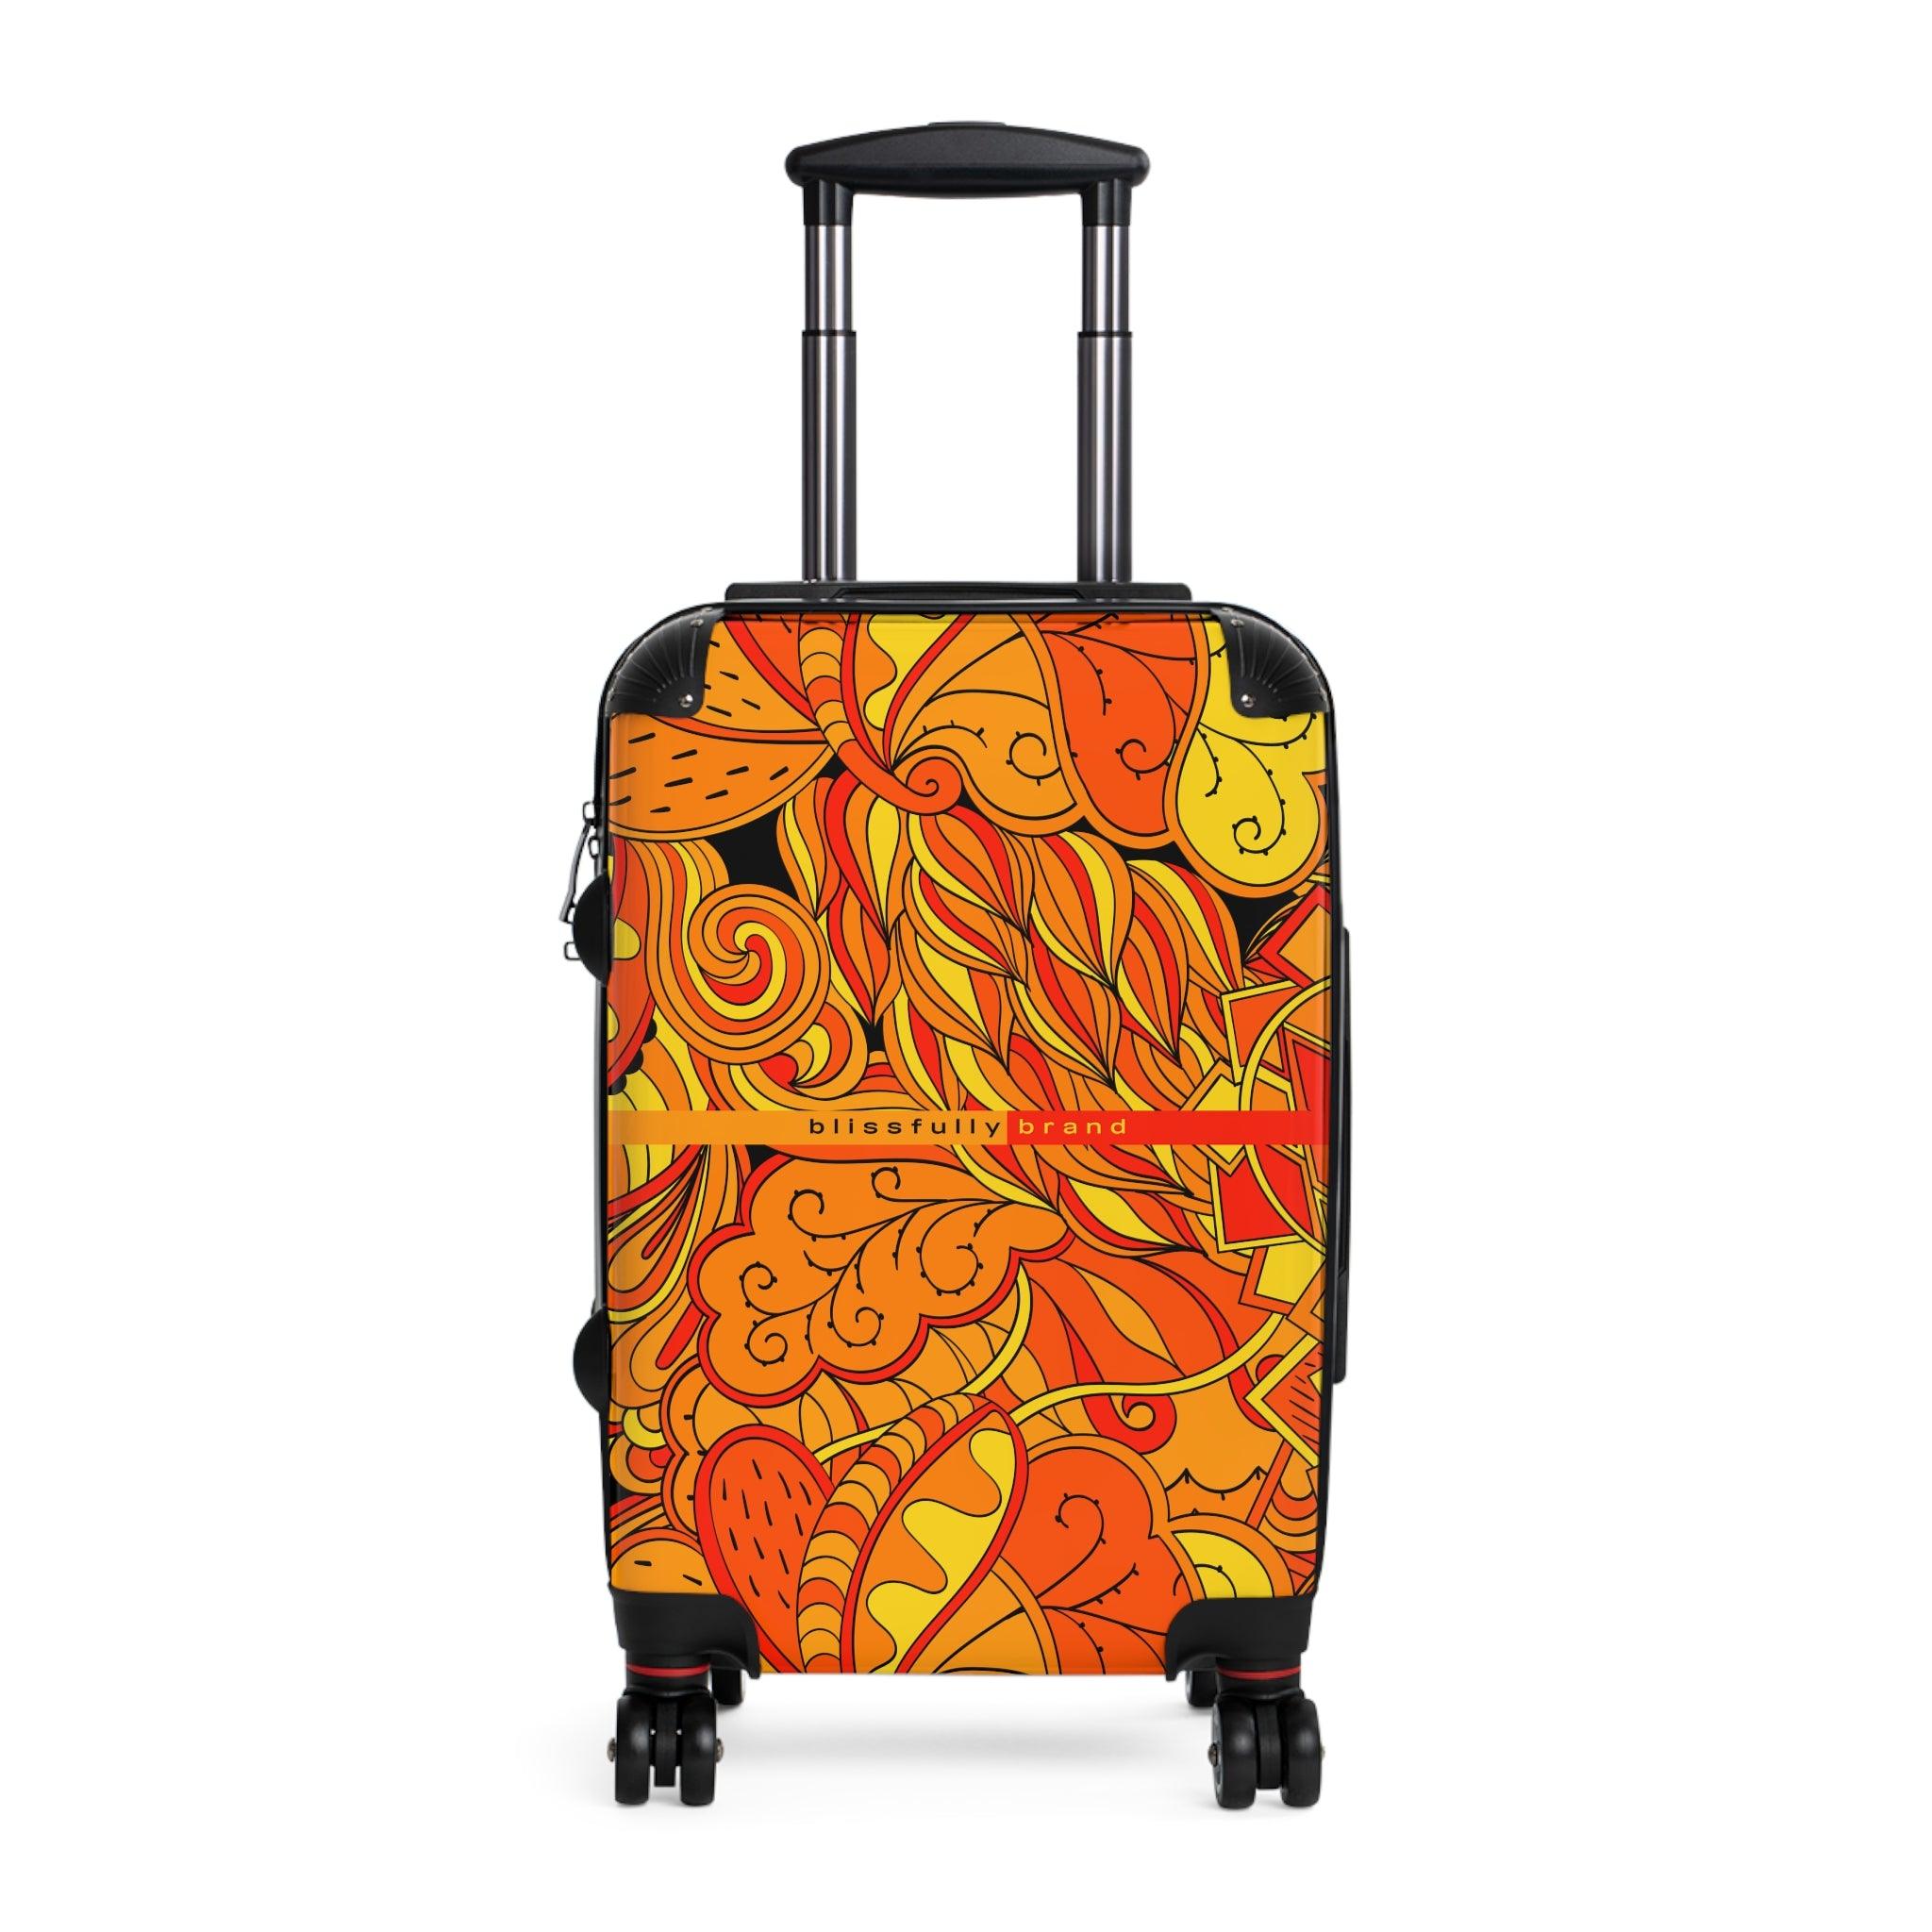 Mandra Luggage Collection - Abstract Kaleidoscope Paisley Floral Print Psychedelic Retro Swirls Funky Multicolor Check in Carry On Roller 360 Hard Shell Unique Retro Vibrant Bold Eclectic Black Orange